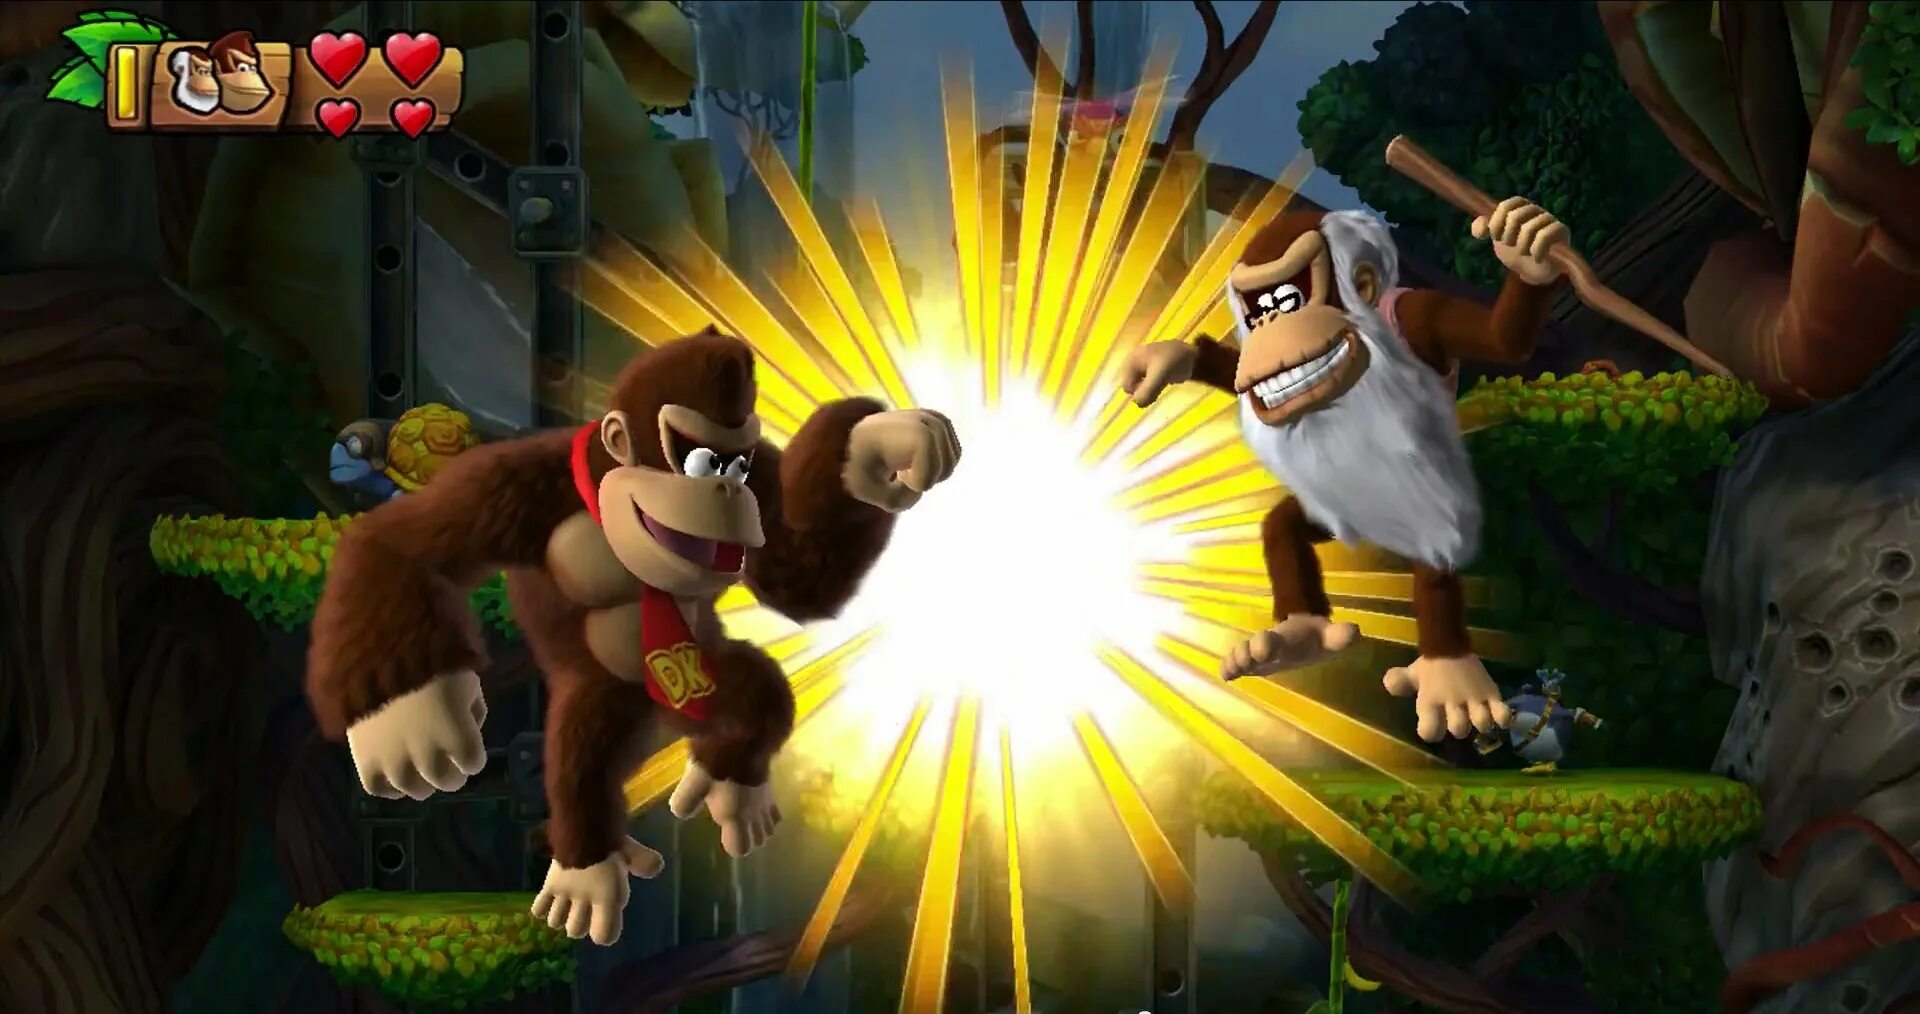 Donkey kong country tropical. Донки Конг игра. Donkey Kong Country: Tropical Freeze. Donkey Kong Country Tropical Freeze Nintendo Switch. Донки Конг донки Конг-старший.